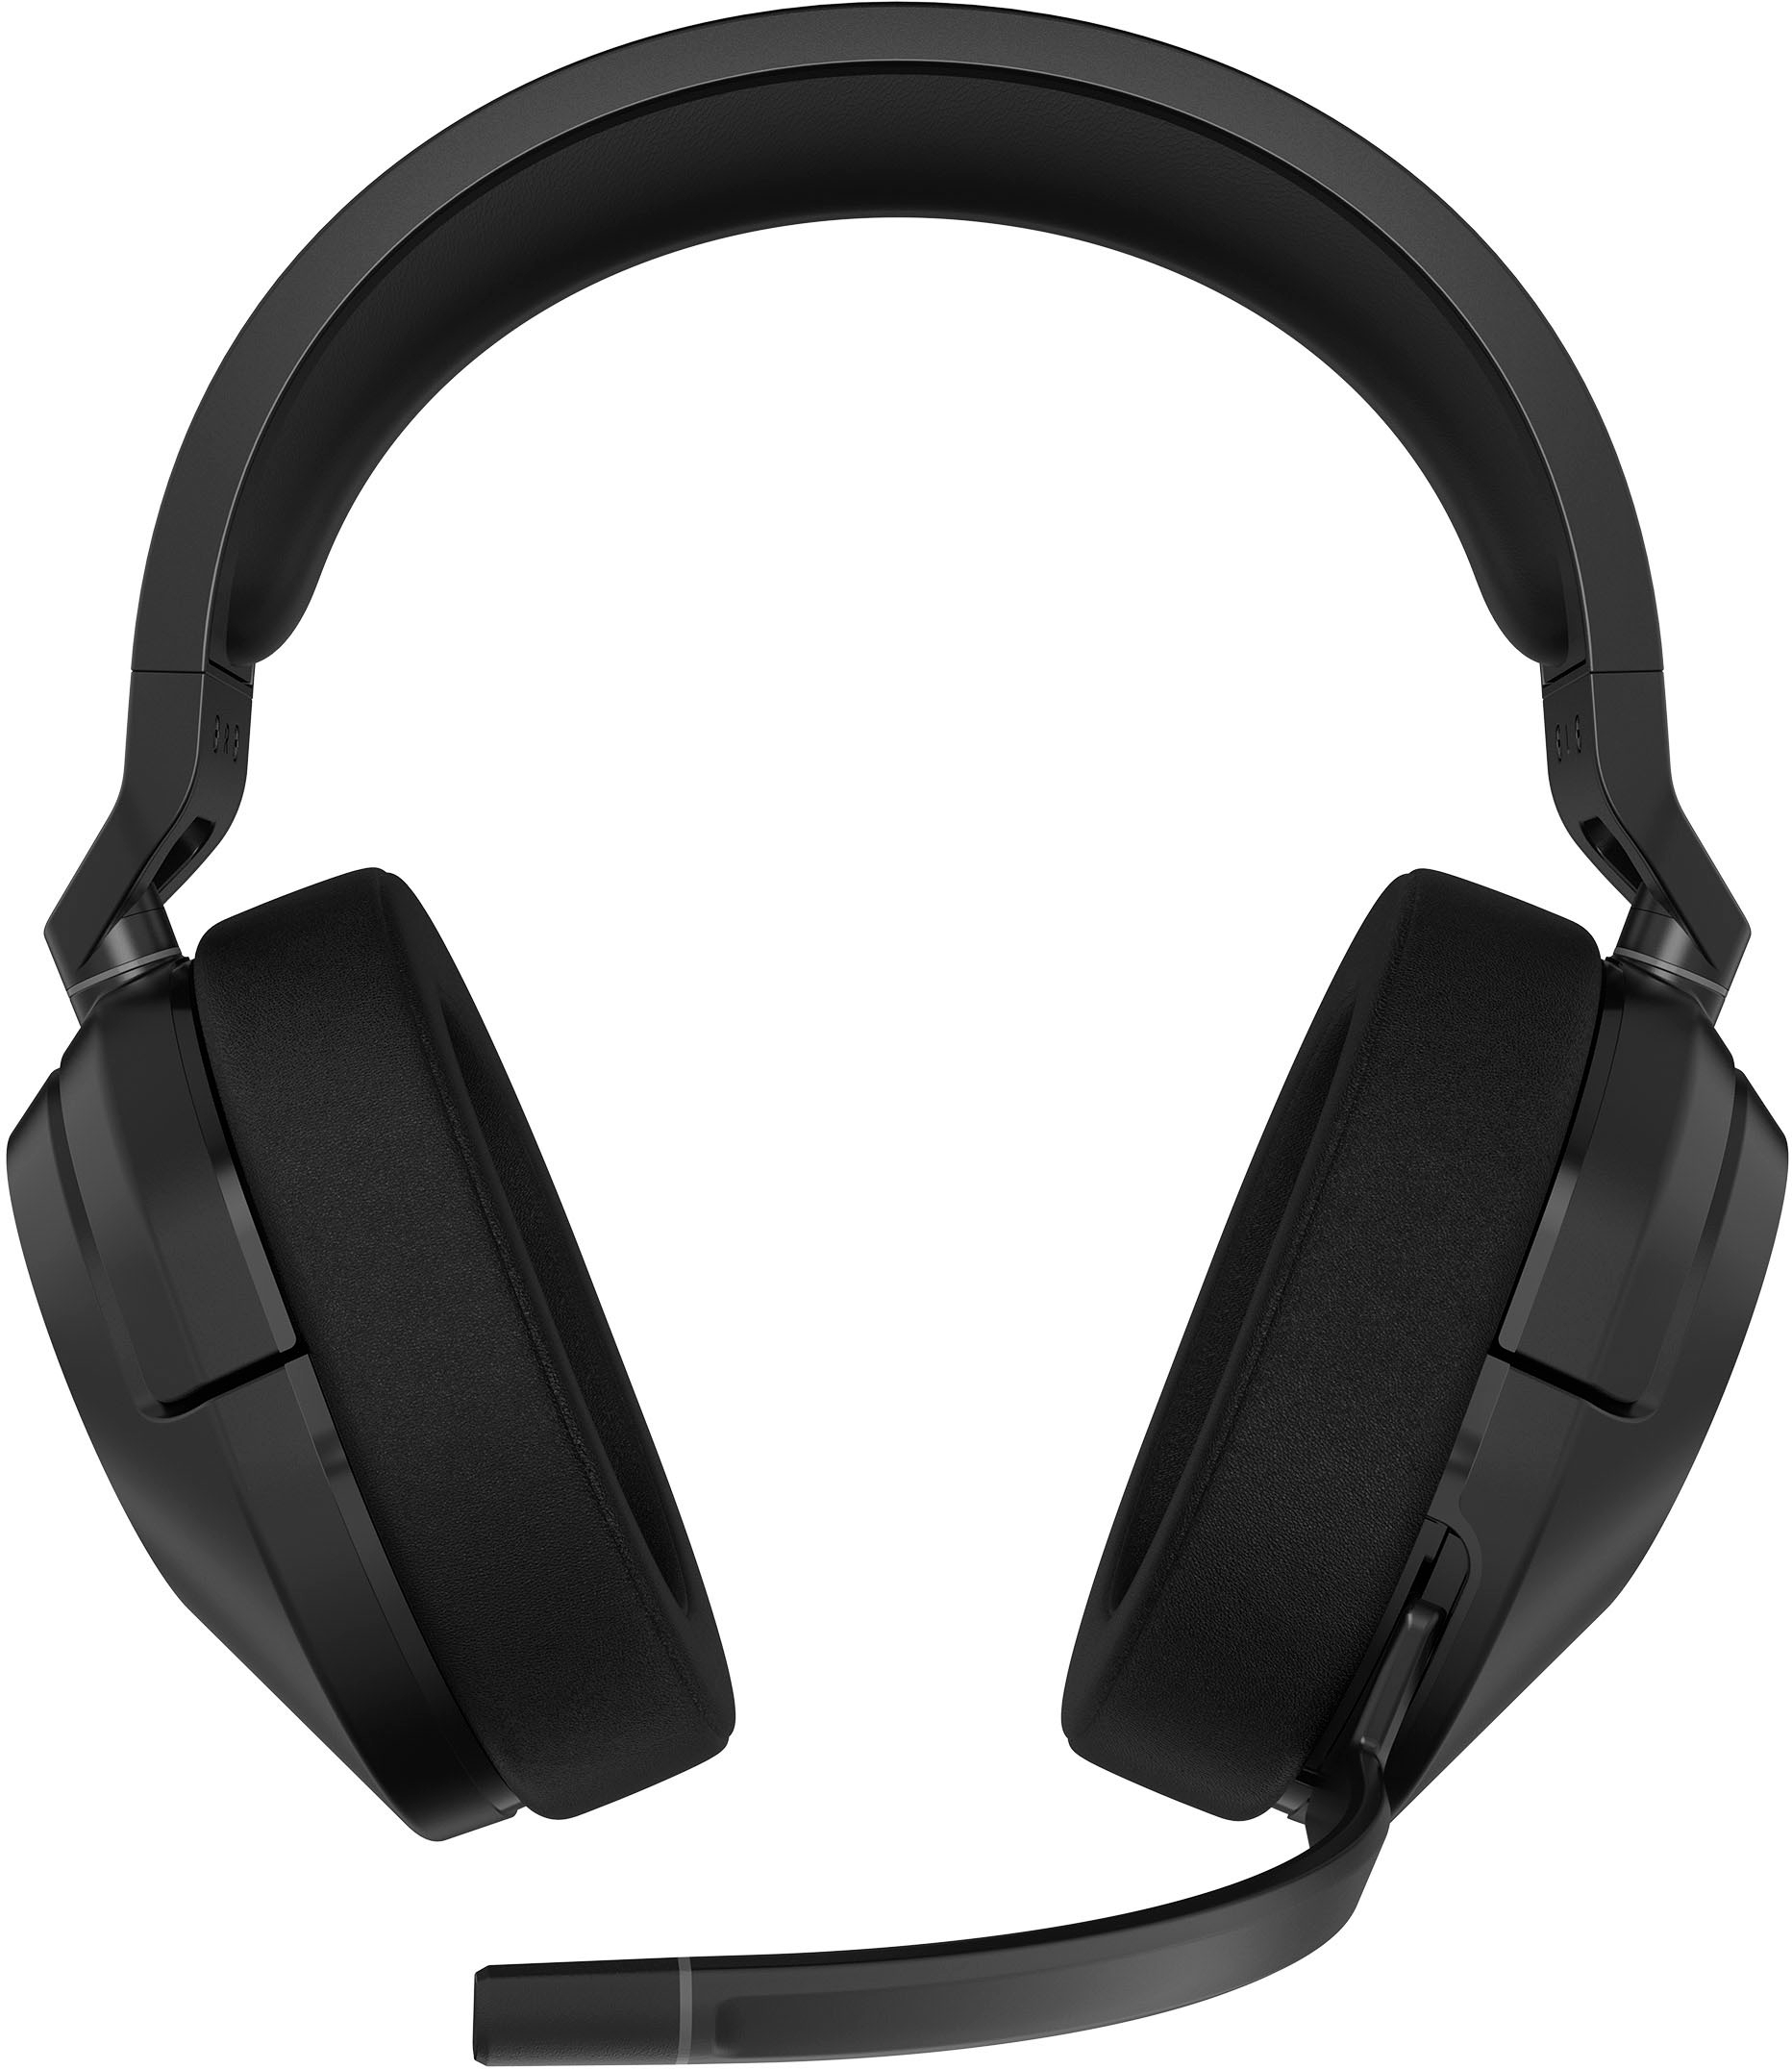 The sleek Corsair HS55 has a new low price at